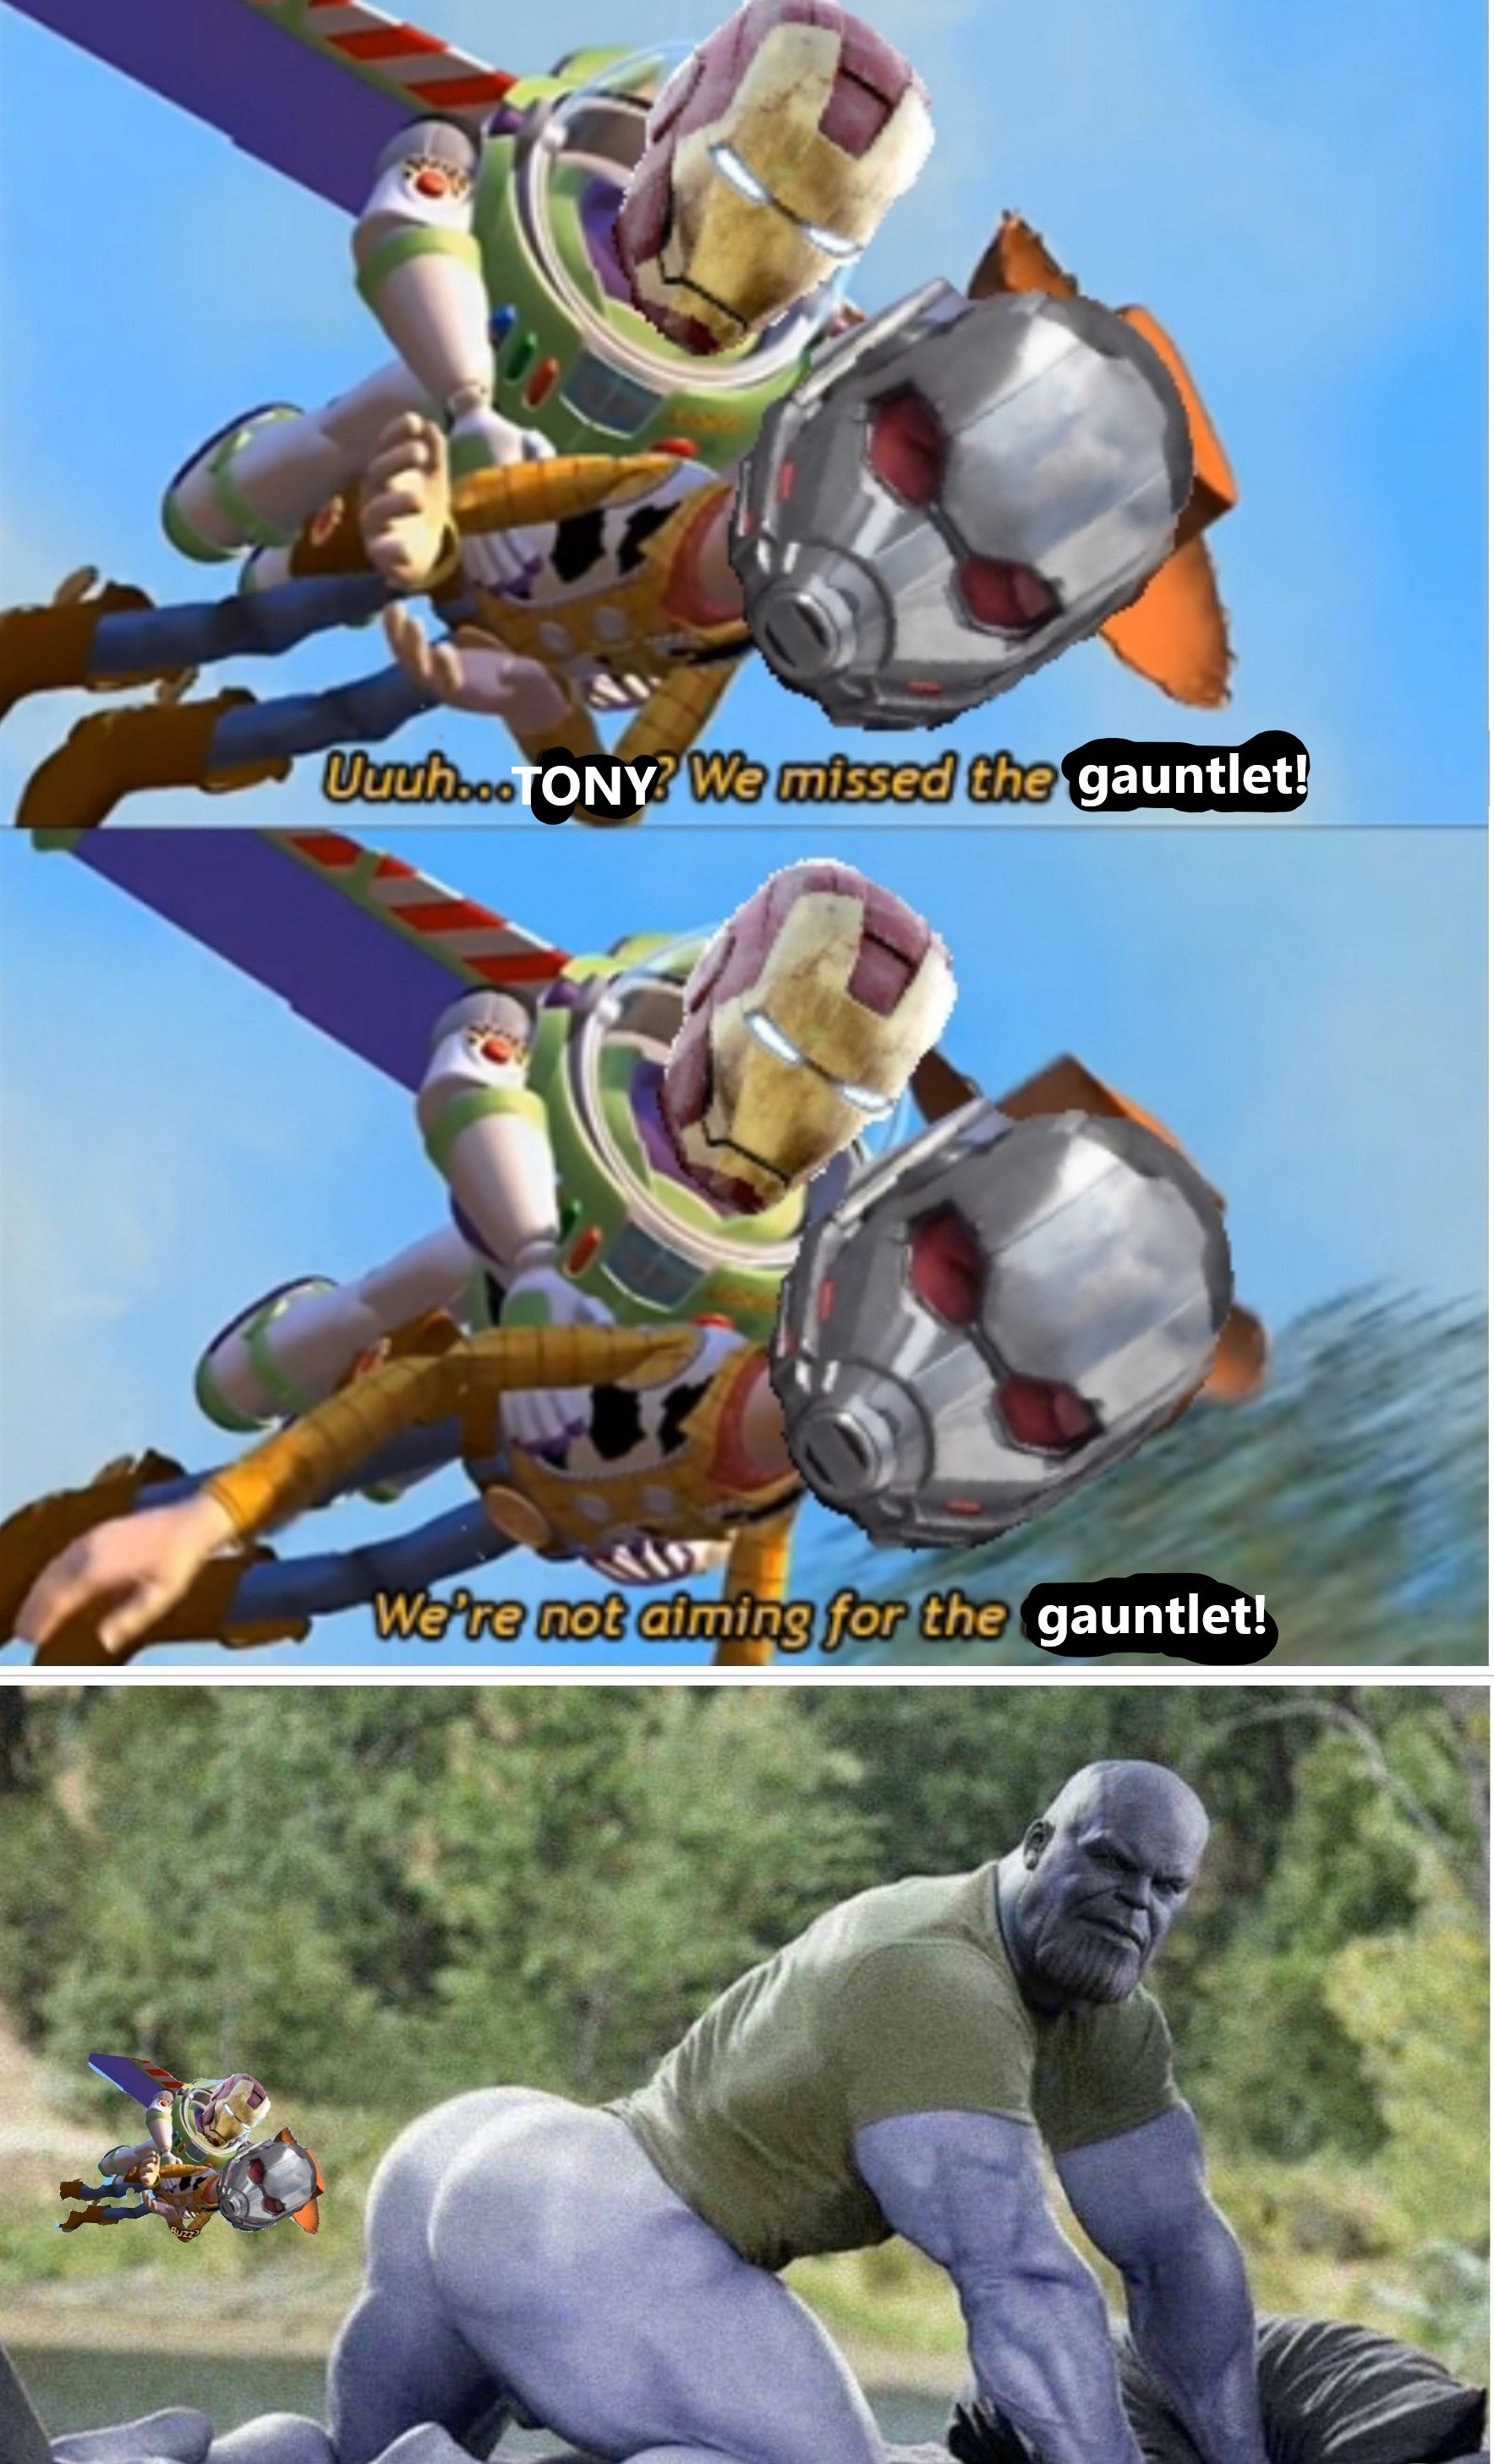 Funny Avengers meme about Ant-Man flying up Thanos' butt